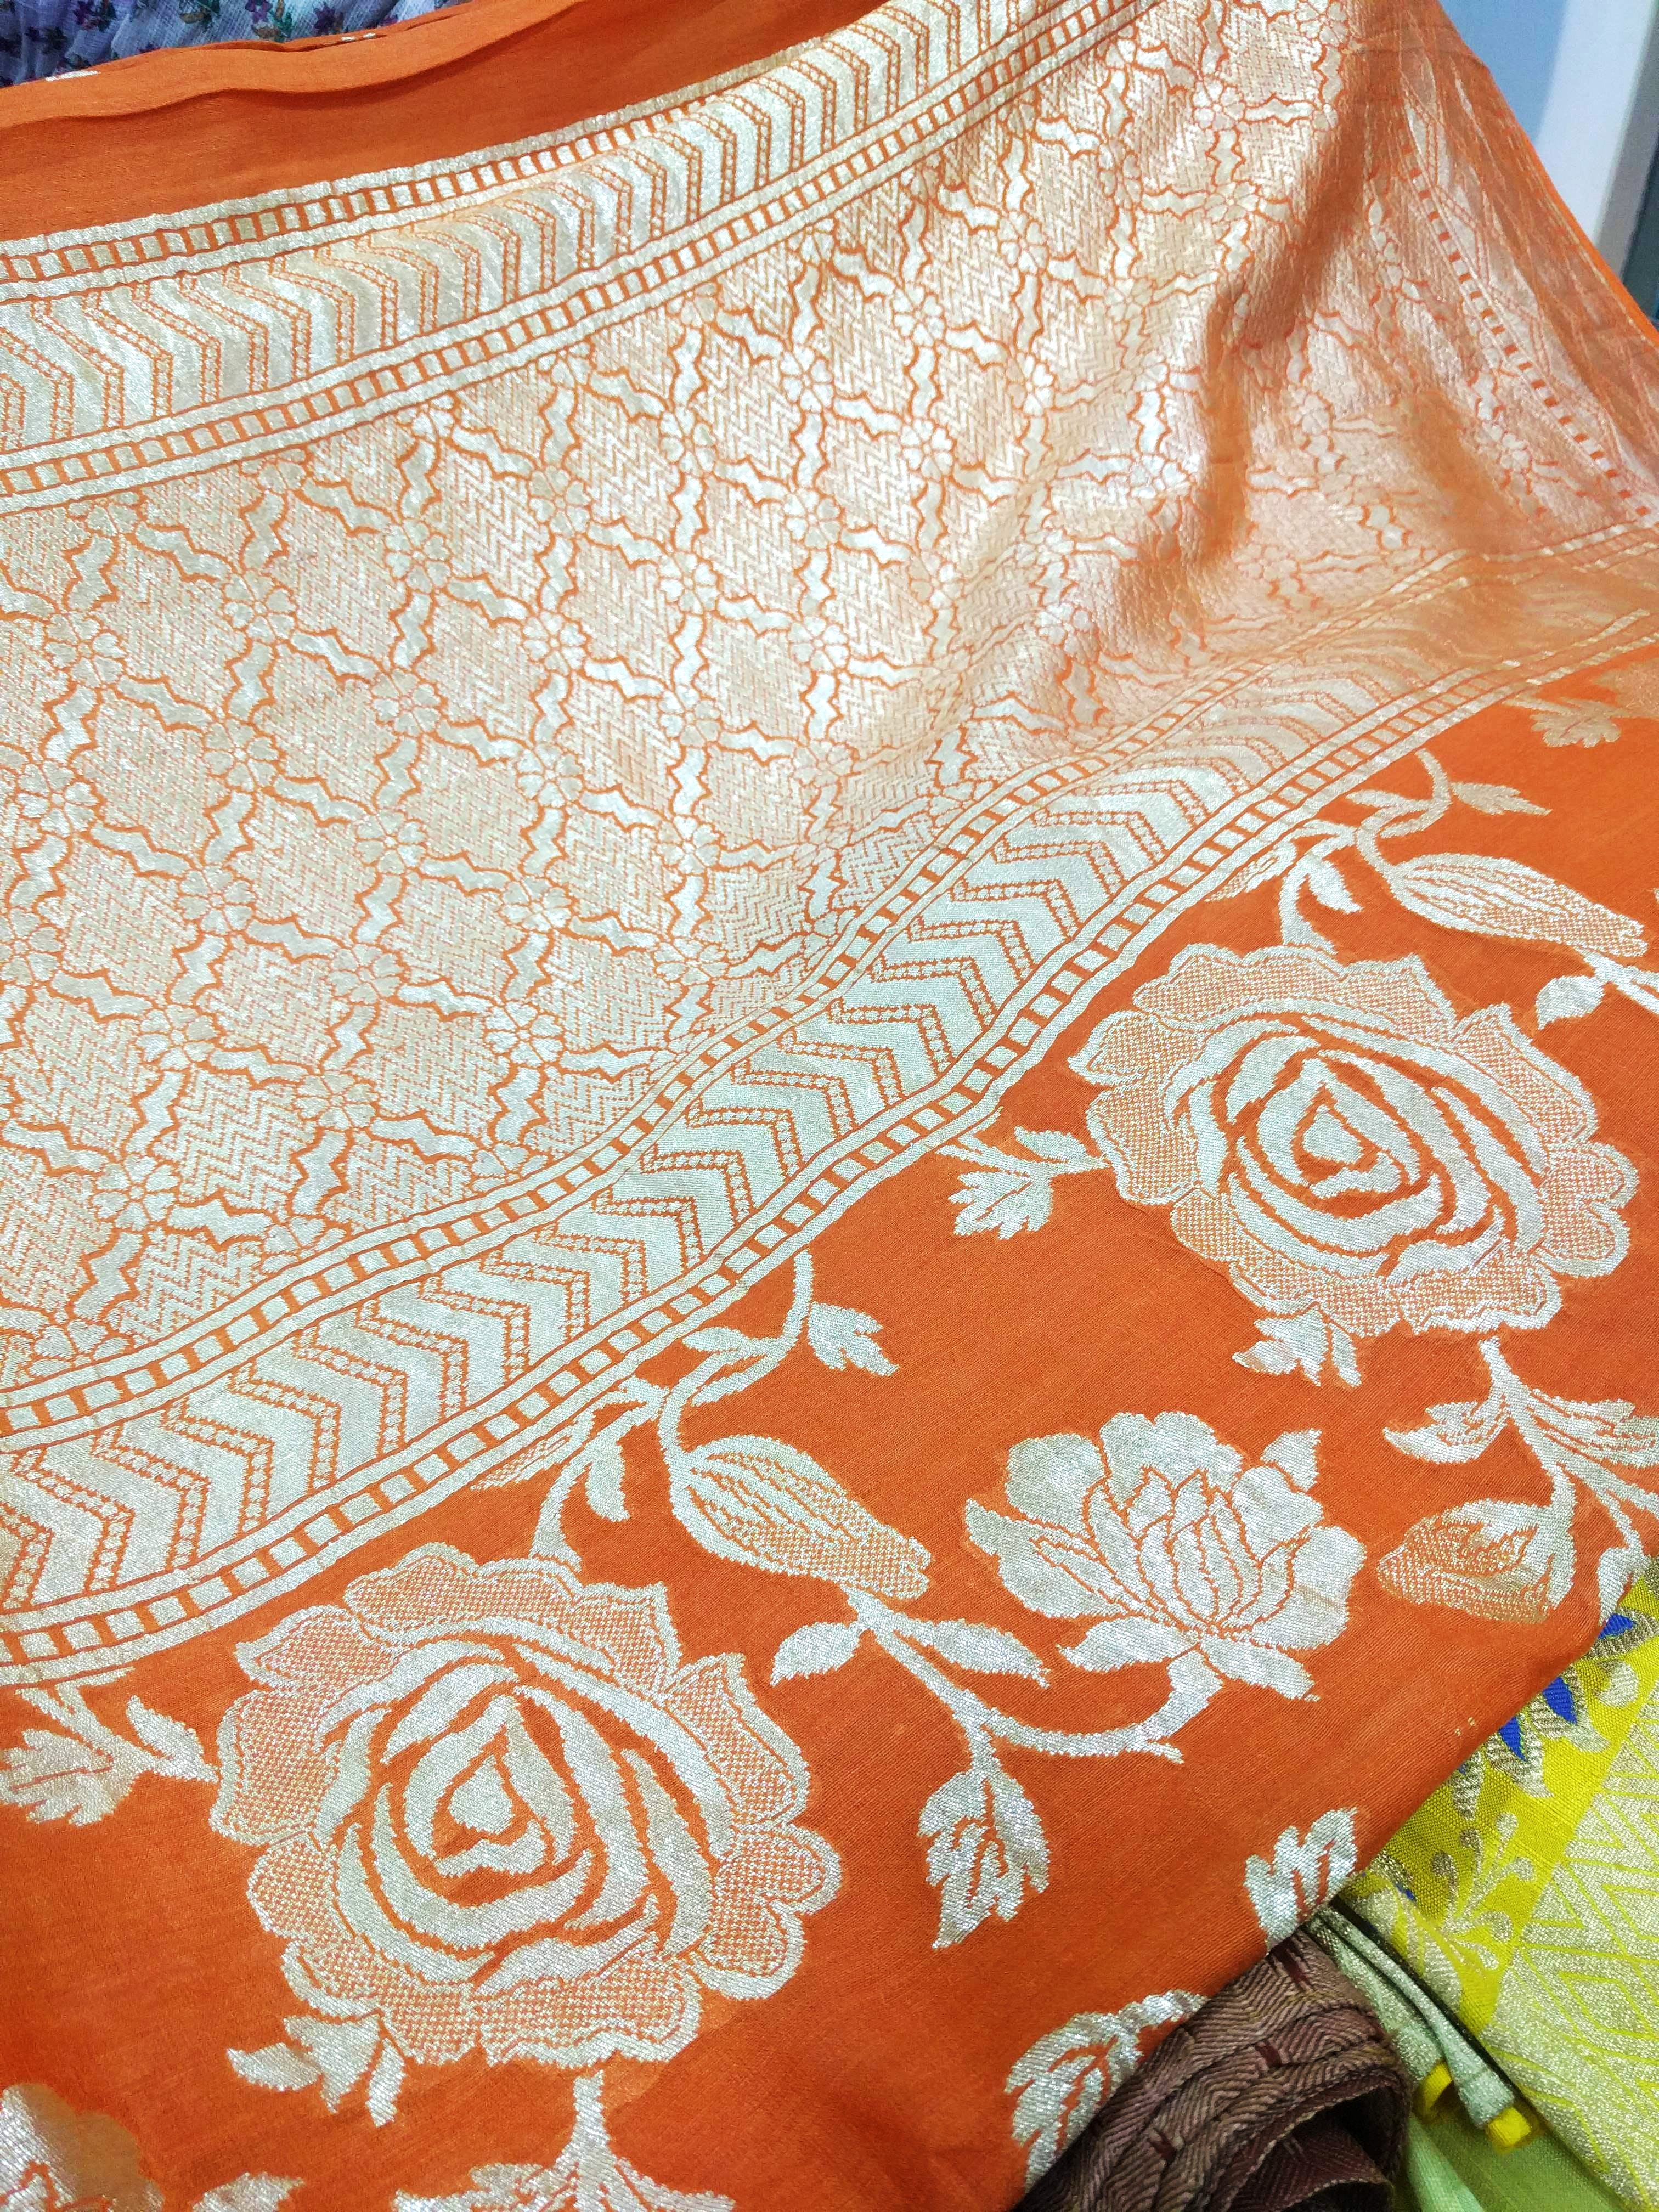 Lace,Orange,Textile,Embroidery,Peach,Needlework,Motif,Woven fabric,Pattern,Tablecloth